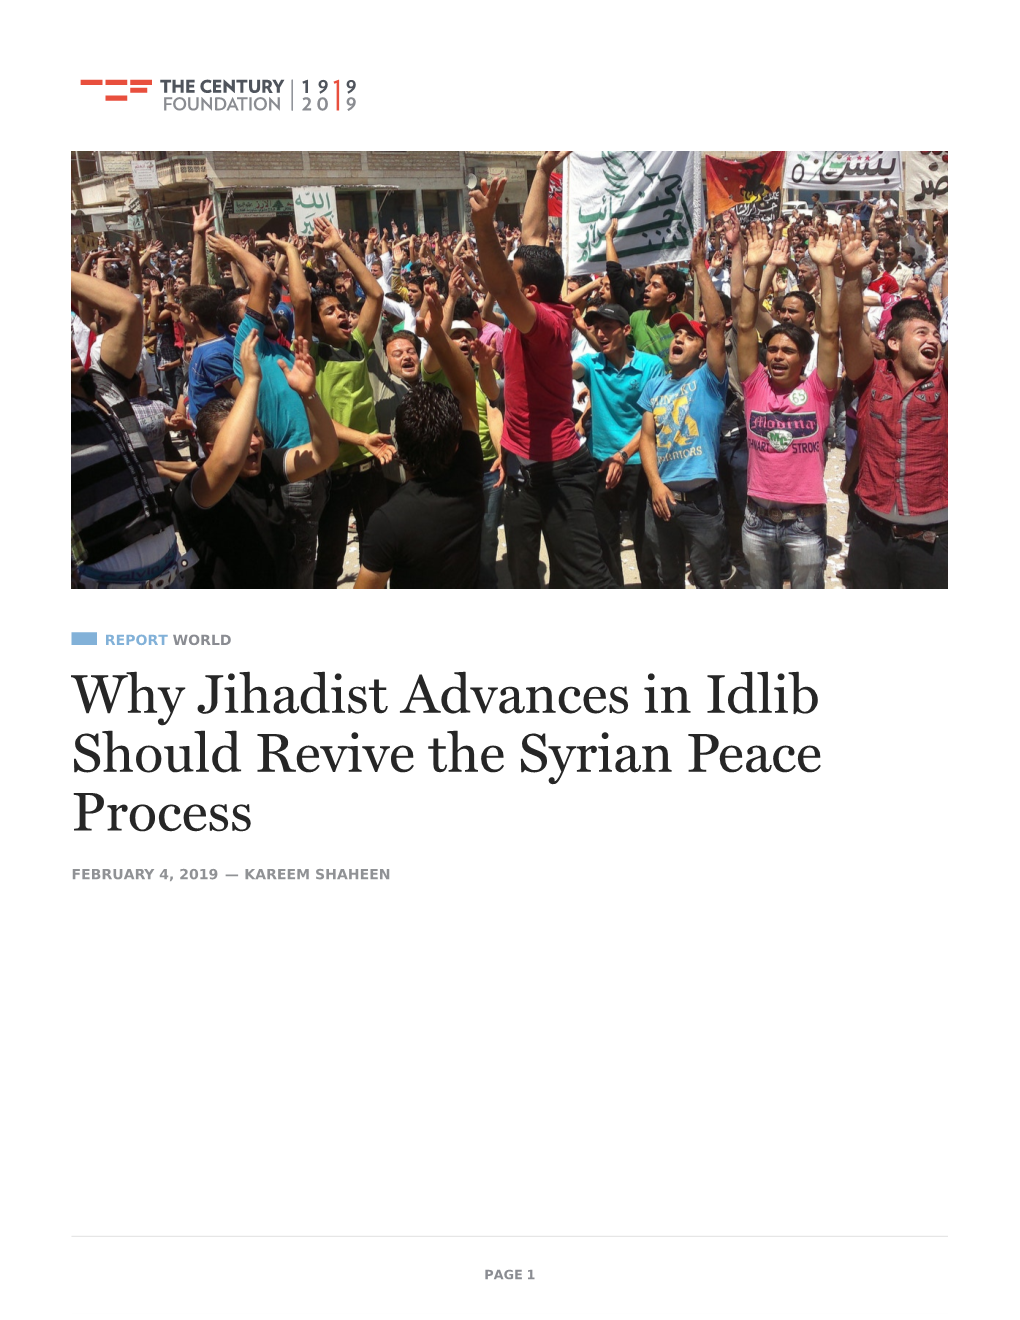 Why Jihadist Advances in Idlib Should Revive the Syrian Peace Process